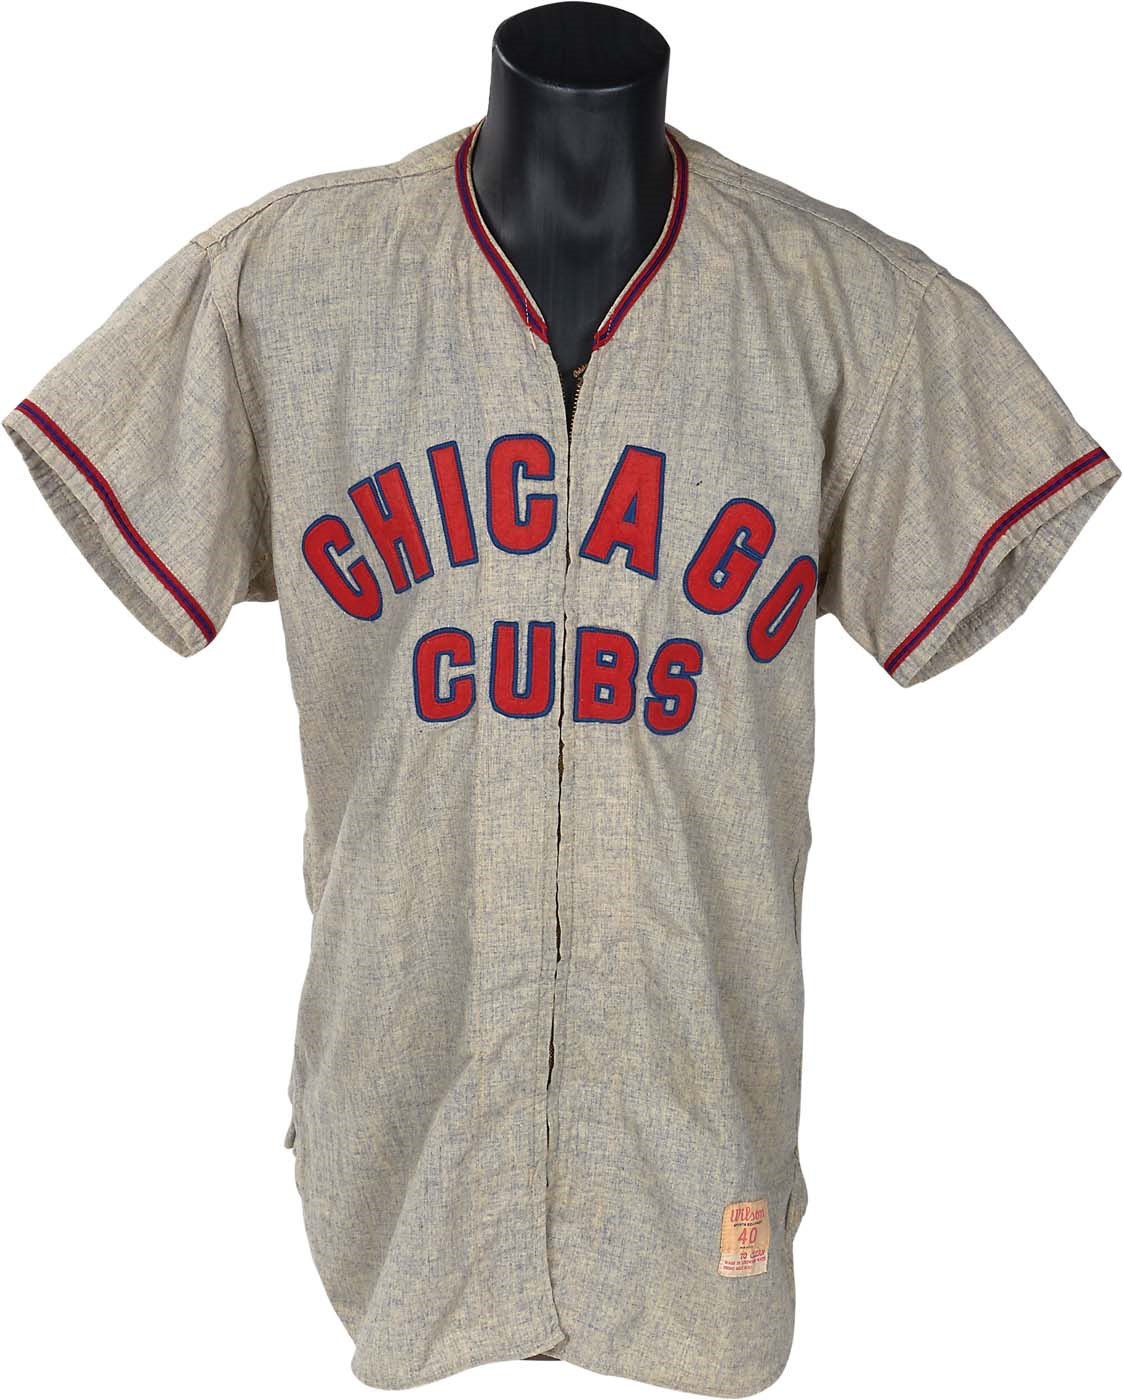 - Very Rare 1957 Chicago Cubs One Year Style Jersey